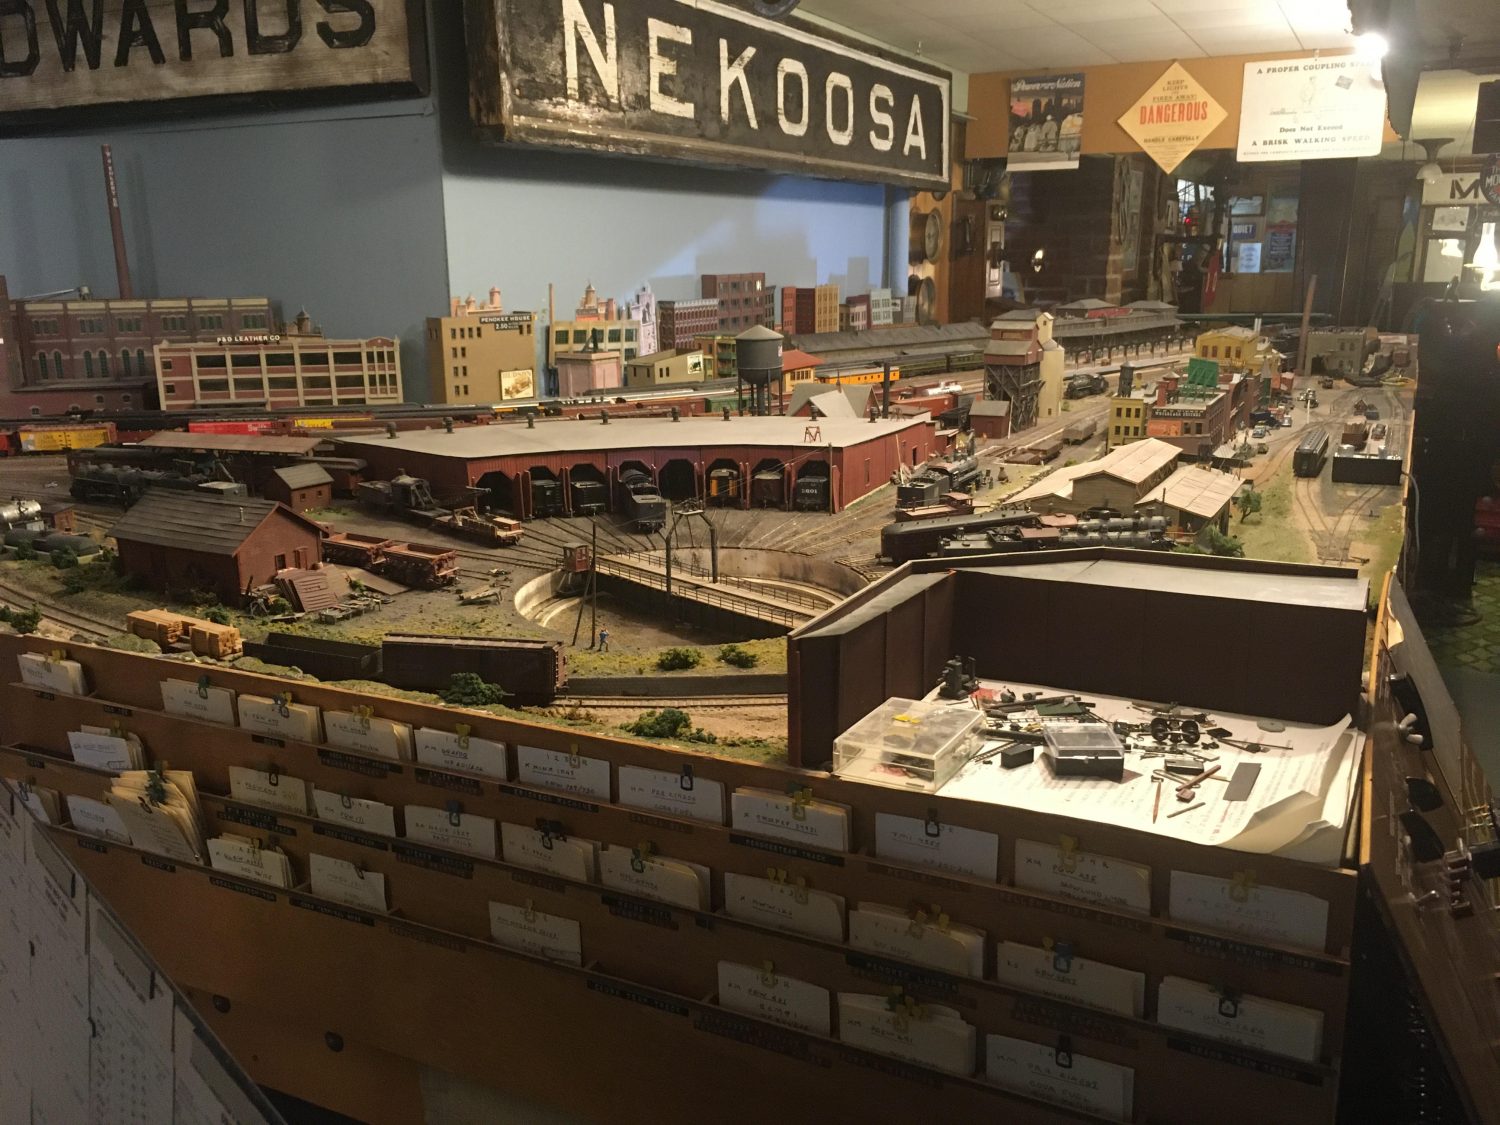 Local man’s passion for model railroading spans eight decades